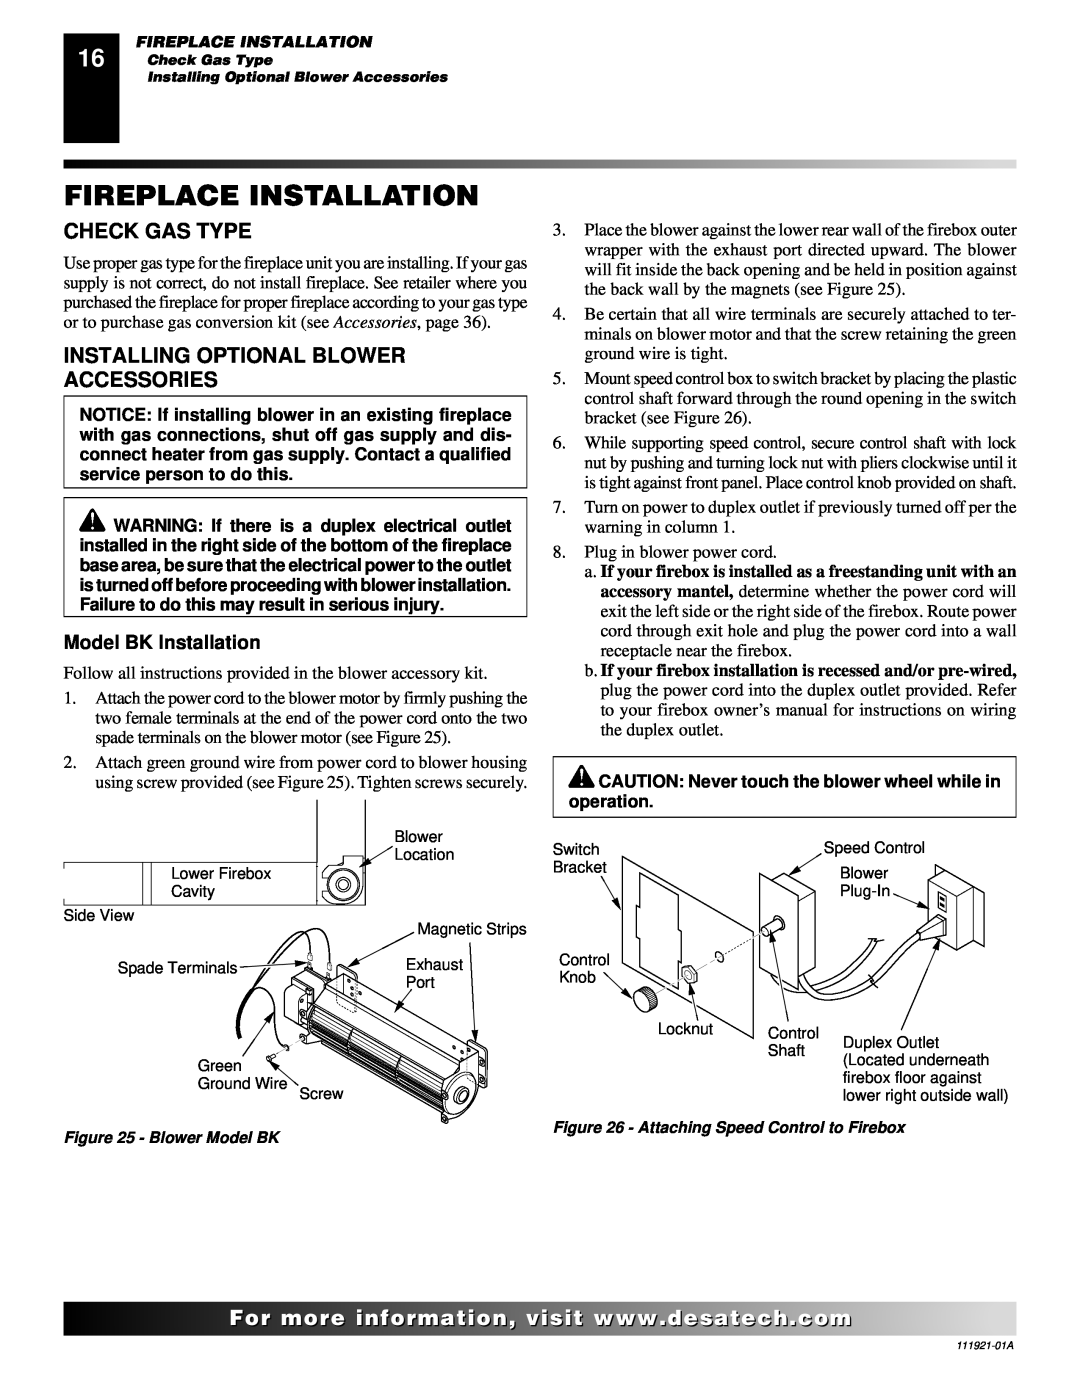 Desa (V)K42N installation manual Fireplace Installation, Check Gas Type, Installing Optional Blower Accessories 